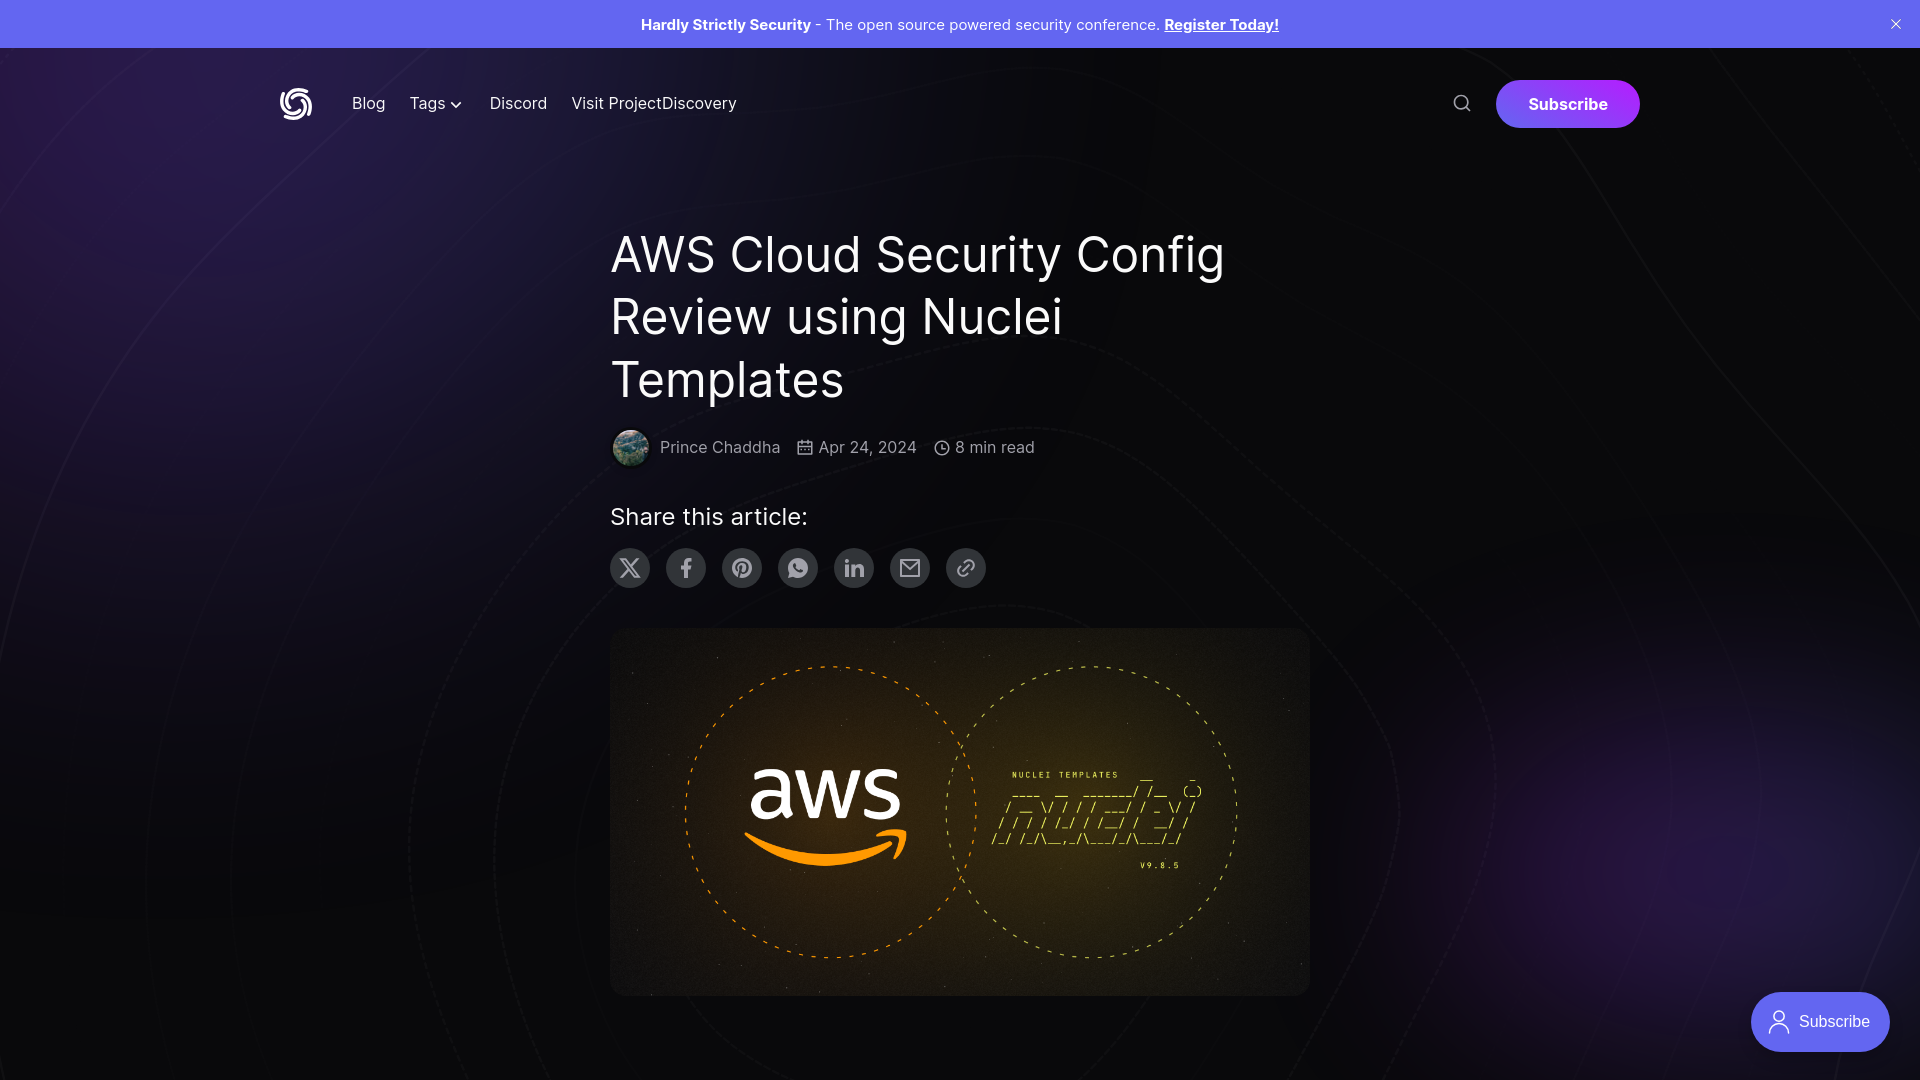 AWS Cloud Security Config Review using Nuclei Templates